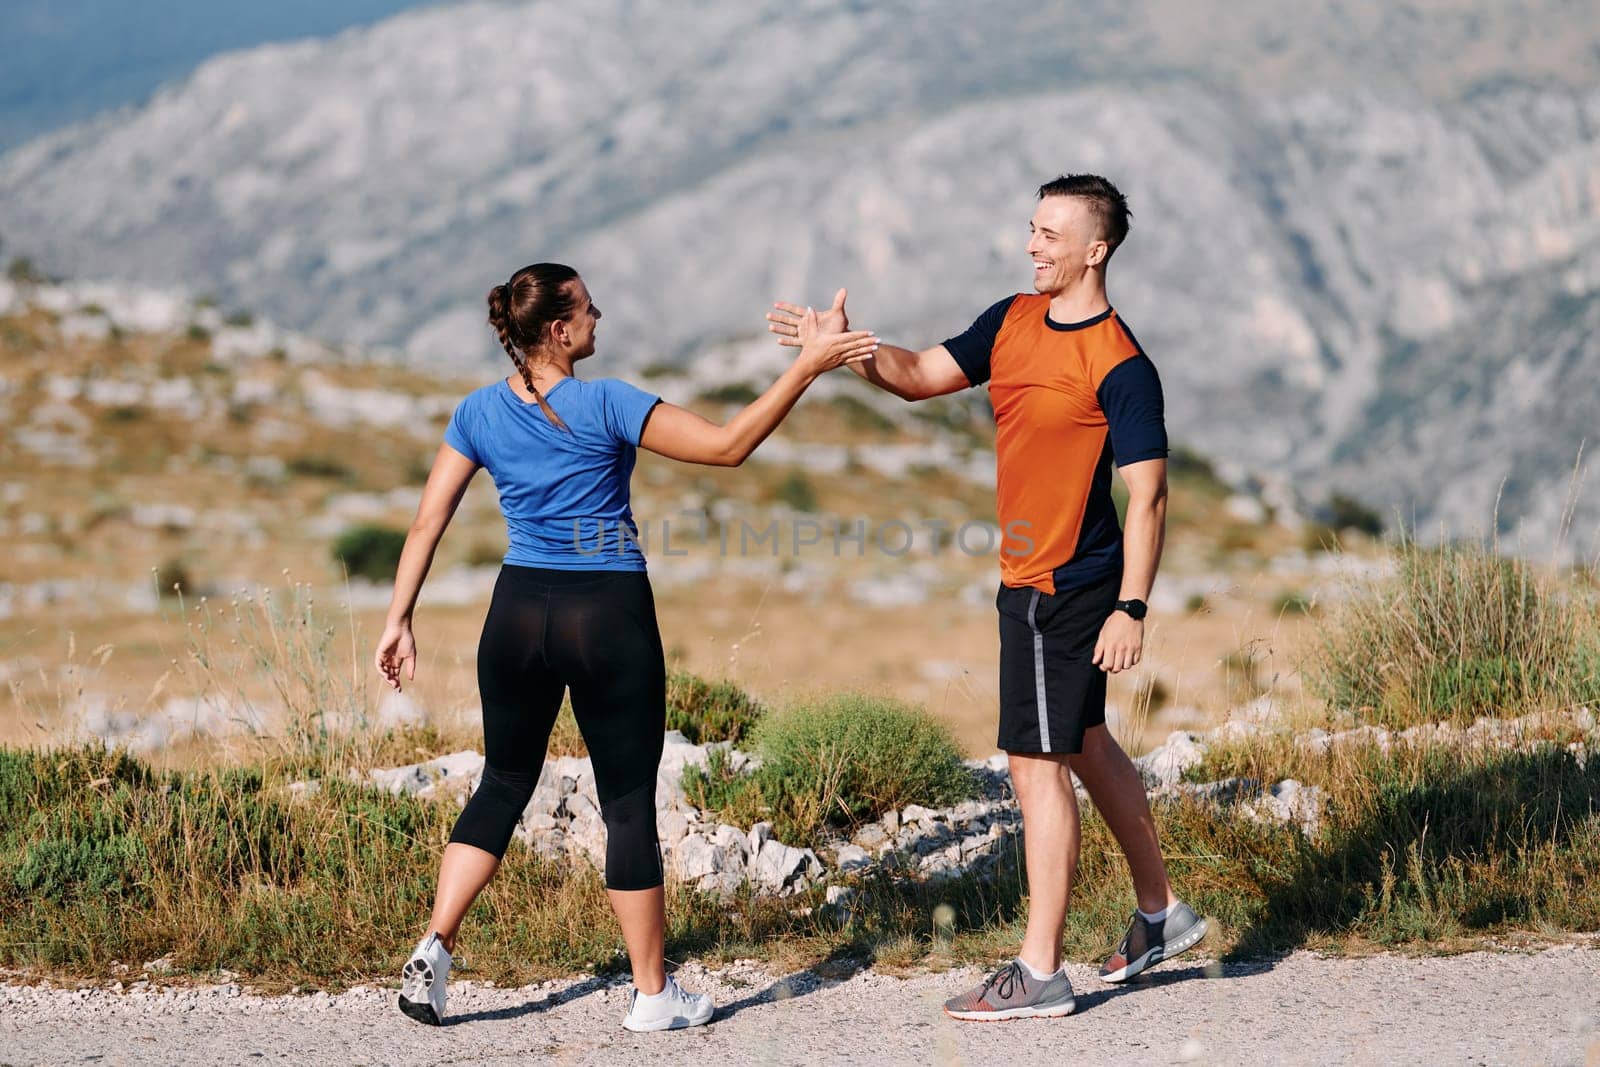 A jubilant couple celebrates their triumphant finish after a challenging morning run, exuding happiness and unity amidst the refreshing outdoor scenery.